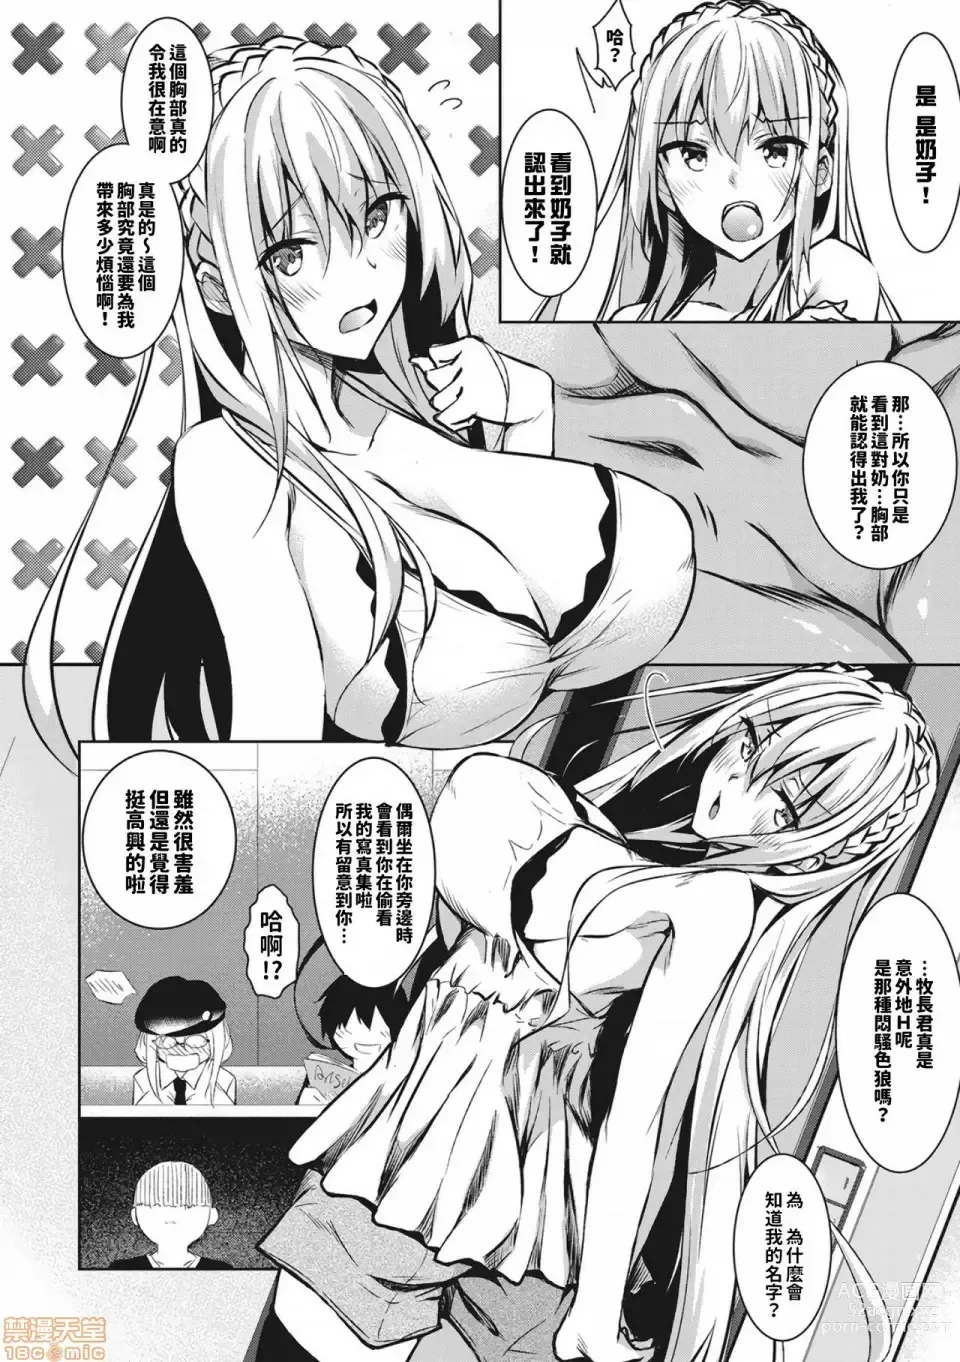 Page 10 of doujinshi Milk Mamire1+Special+FL+SideStory Full-Version